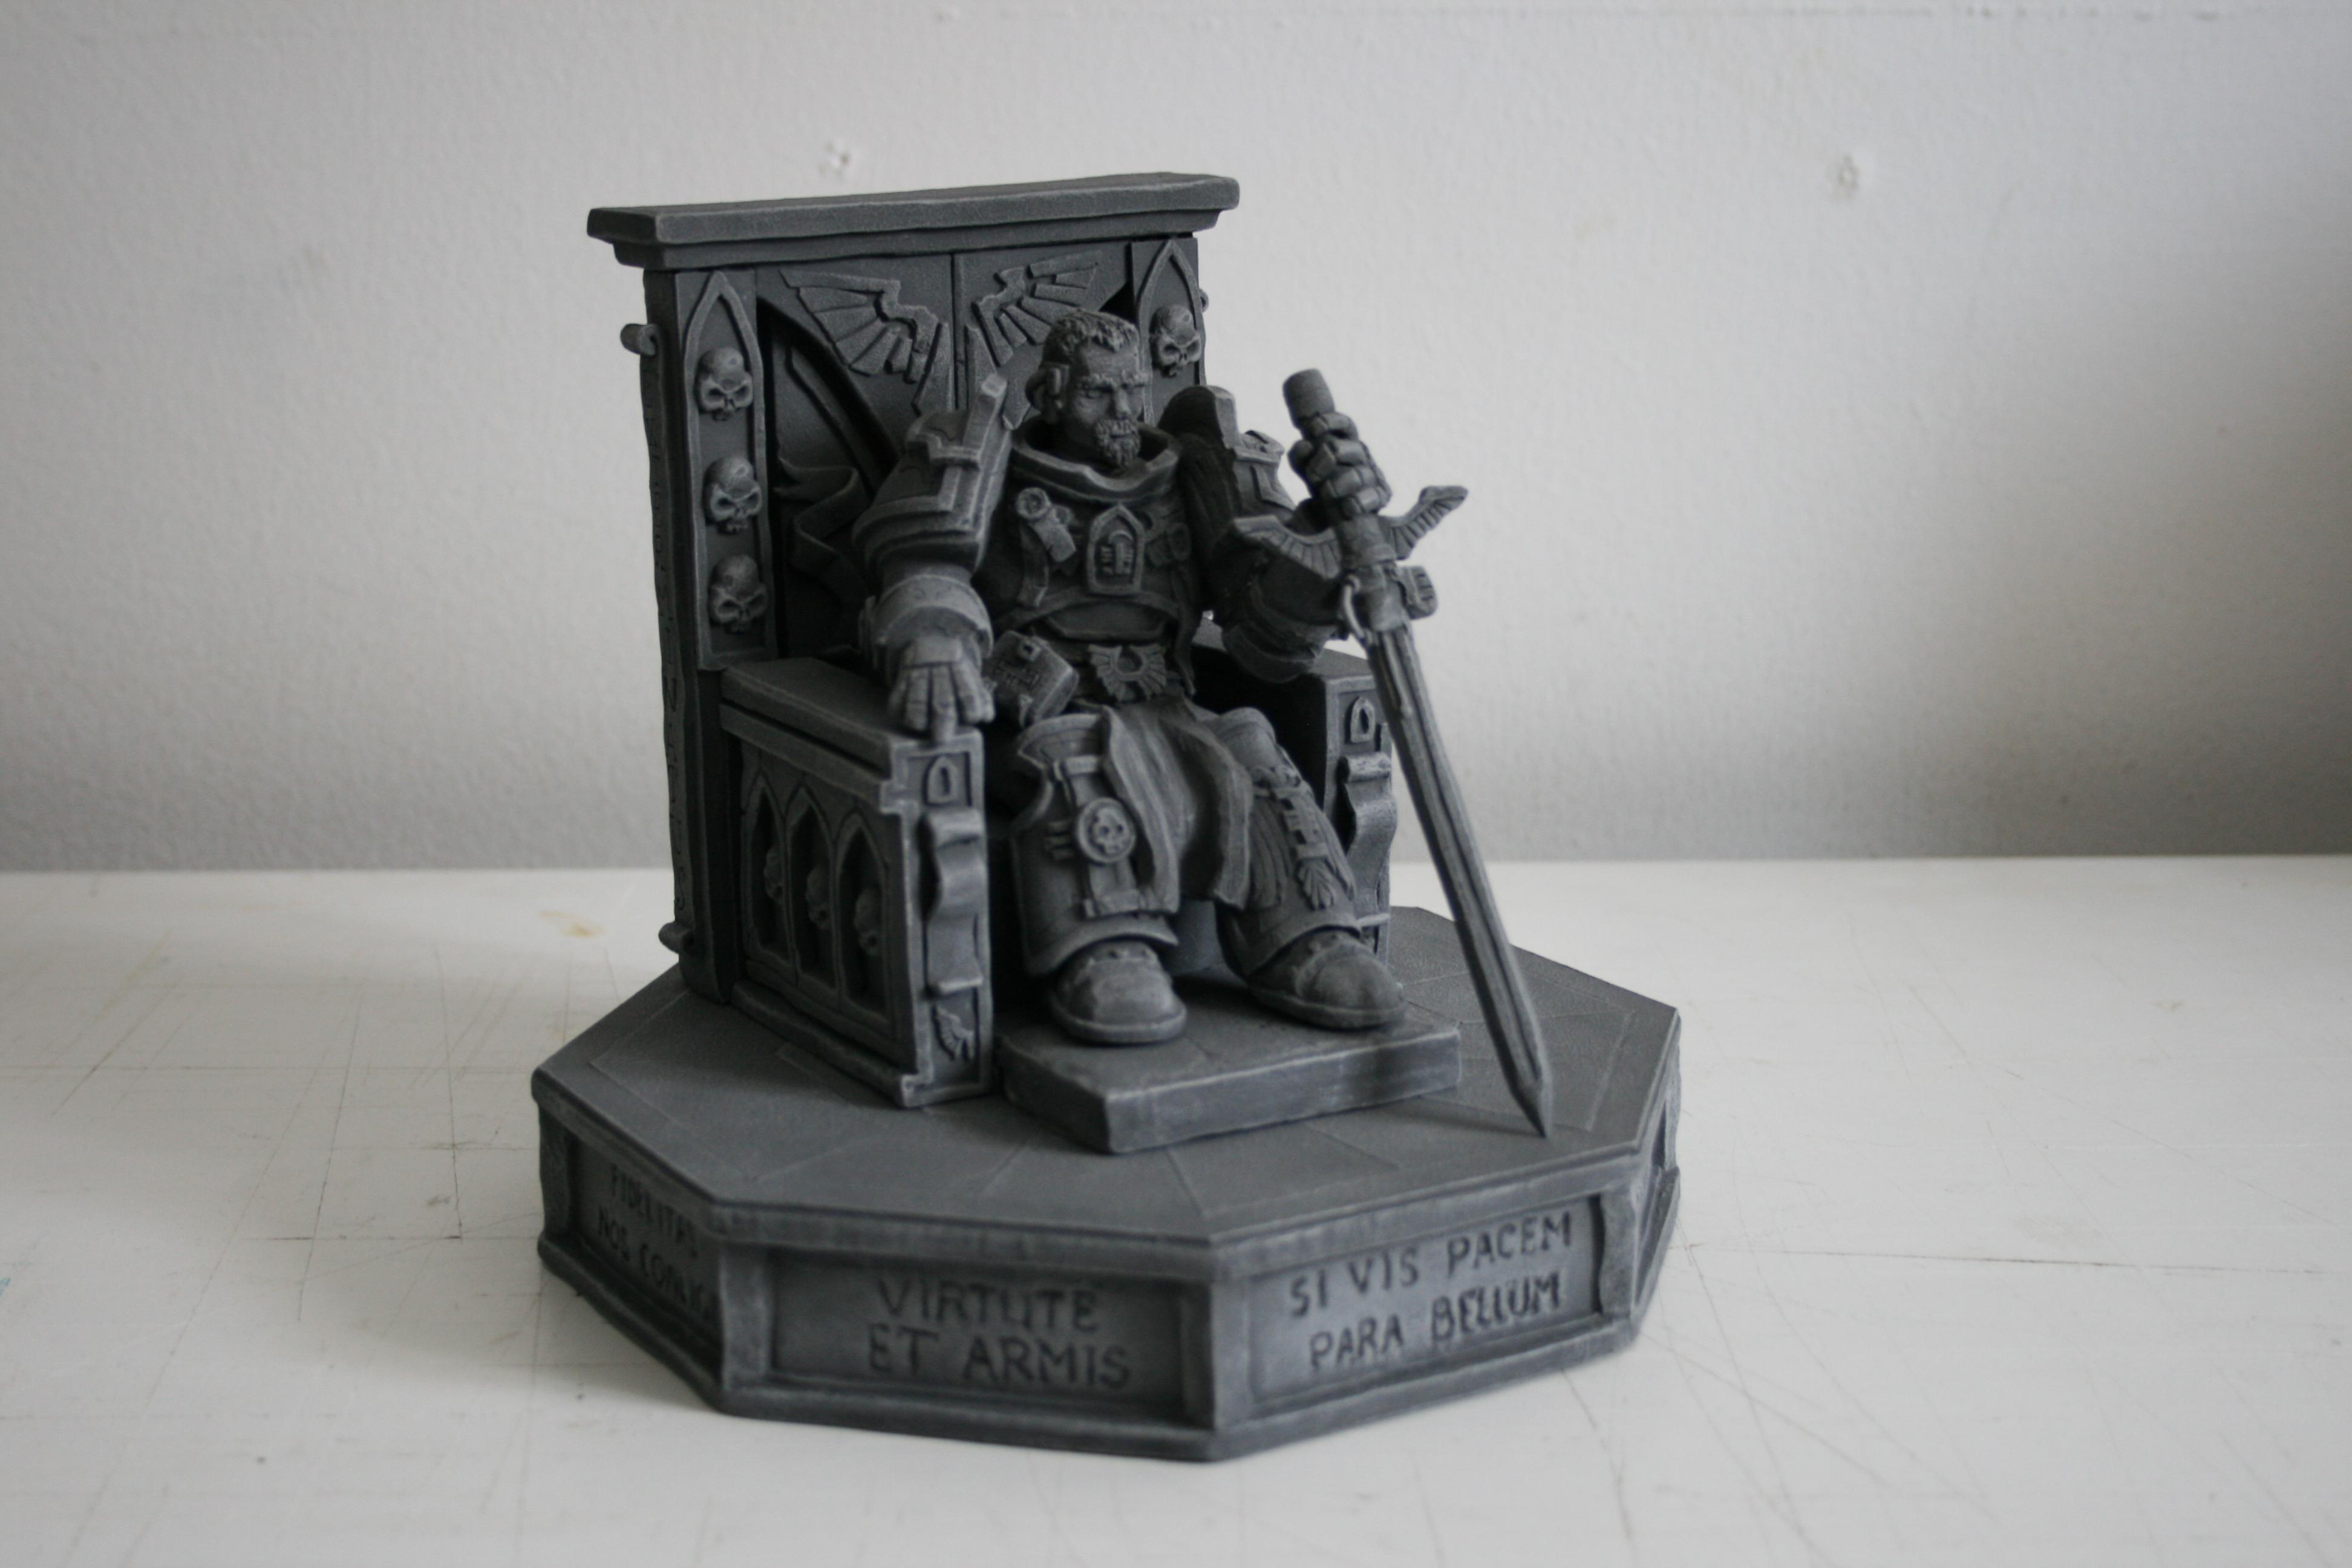 40k Inquisitor, Chaos, Chaos Lord, Chaos Space Marines, Imperial, Imperium, Inquisition, Inquisitor, Inquisitor Lord, Lord Inquisitor, Monument, Scatch Build, Scratch Build, Sculpting, Sculpture, Space Marines, Statue, Statues, Terrain, Throne, Warhammer 40,000, Warhammer Fantasy